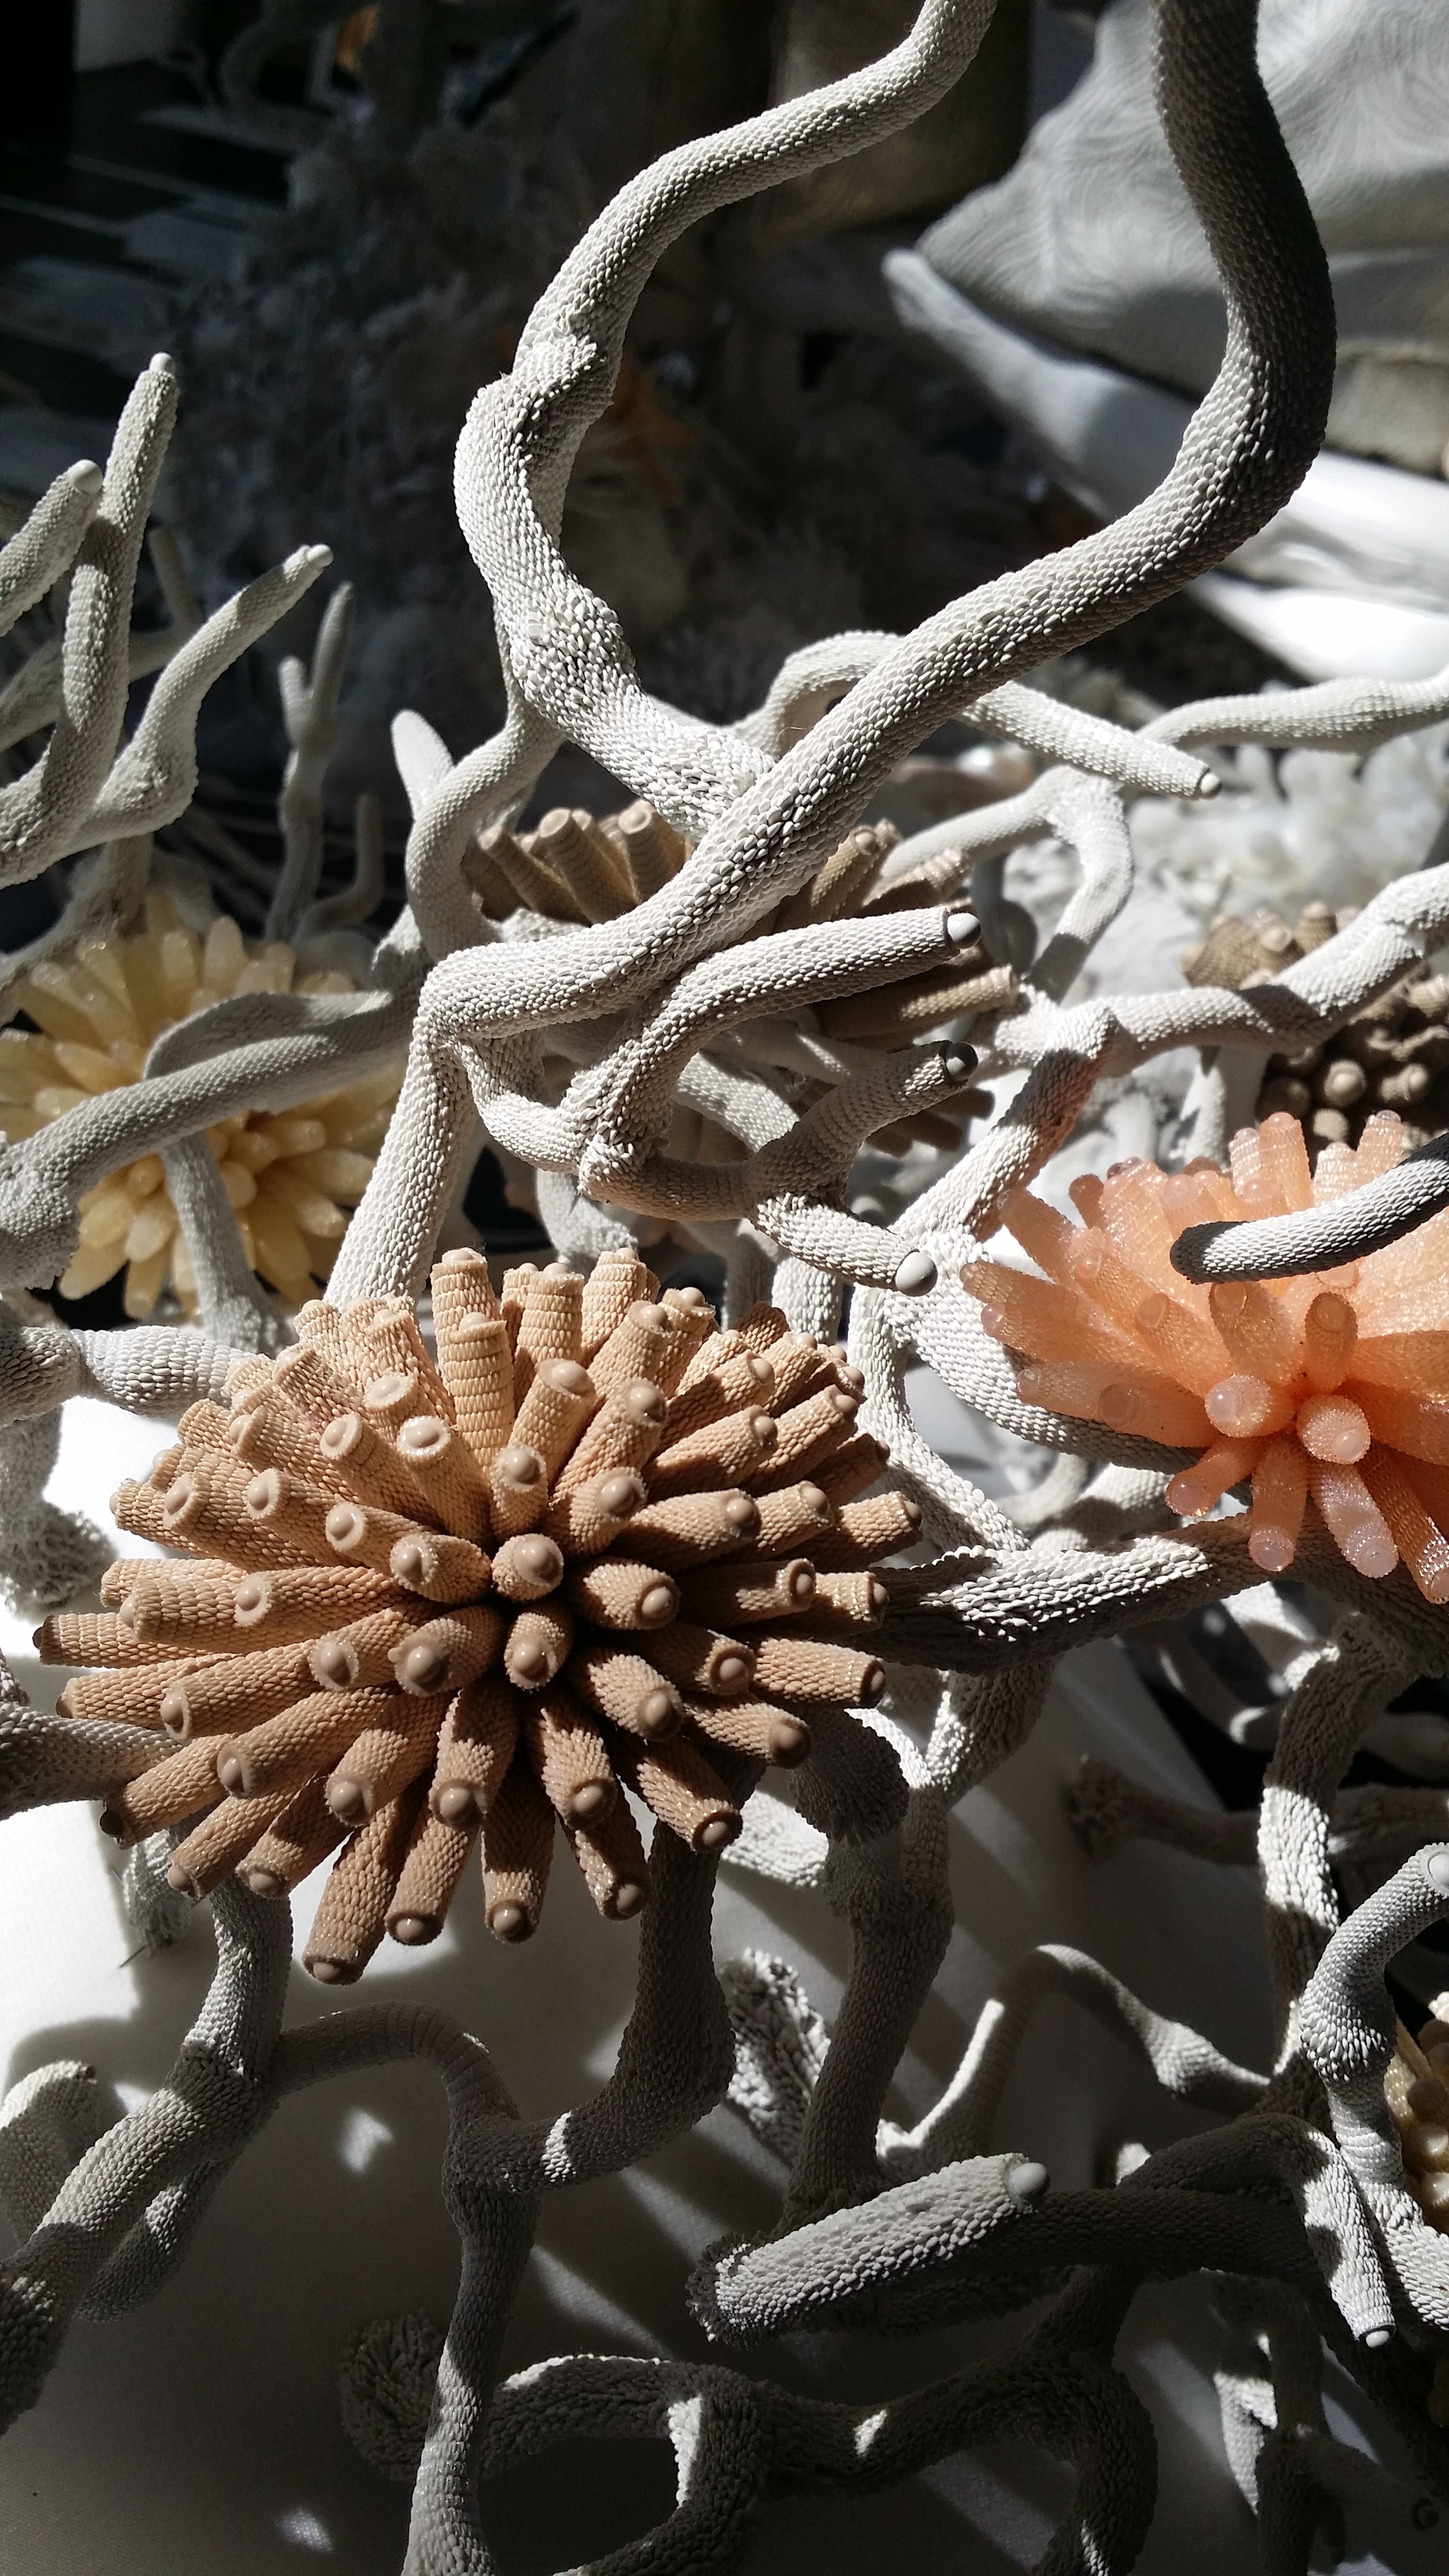 Silicon and Textile Reefs and corlals Broochs by Tzuri Gueta Courtesy of the artist